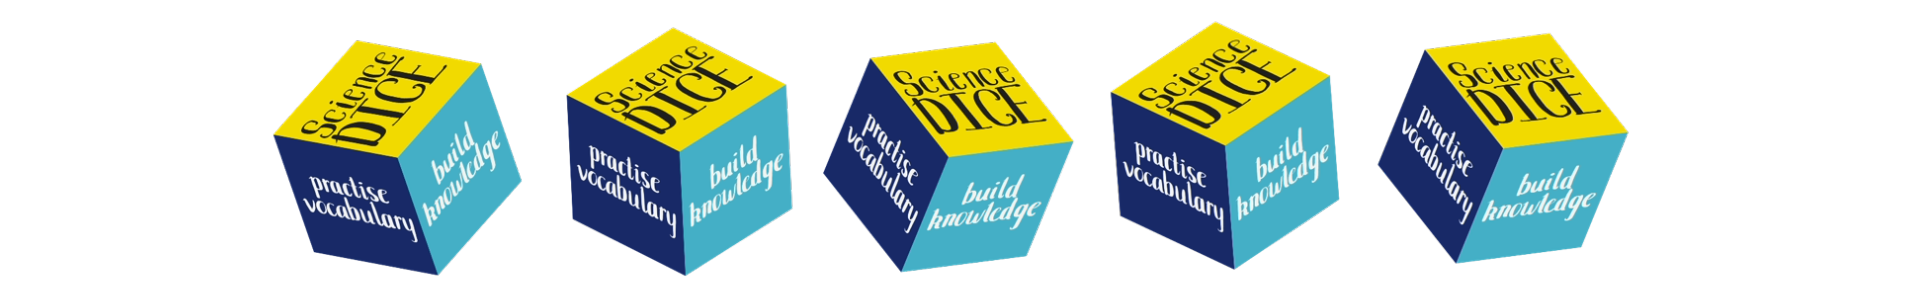 image of multiple science dice that helps to build science knowledge and practice vocabulary